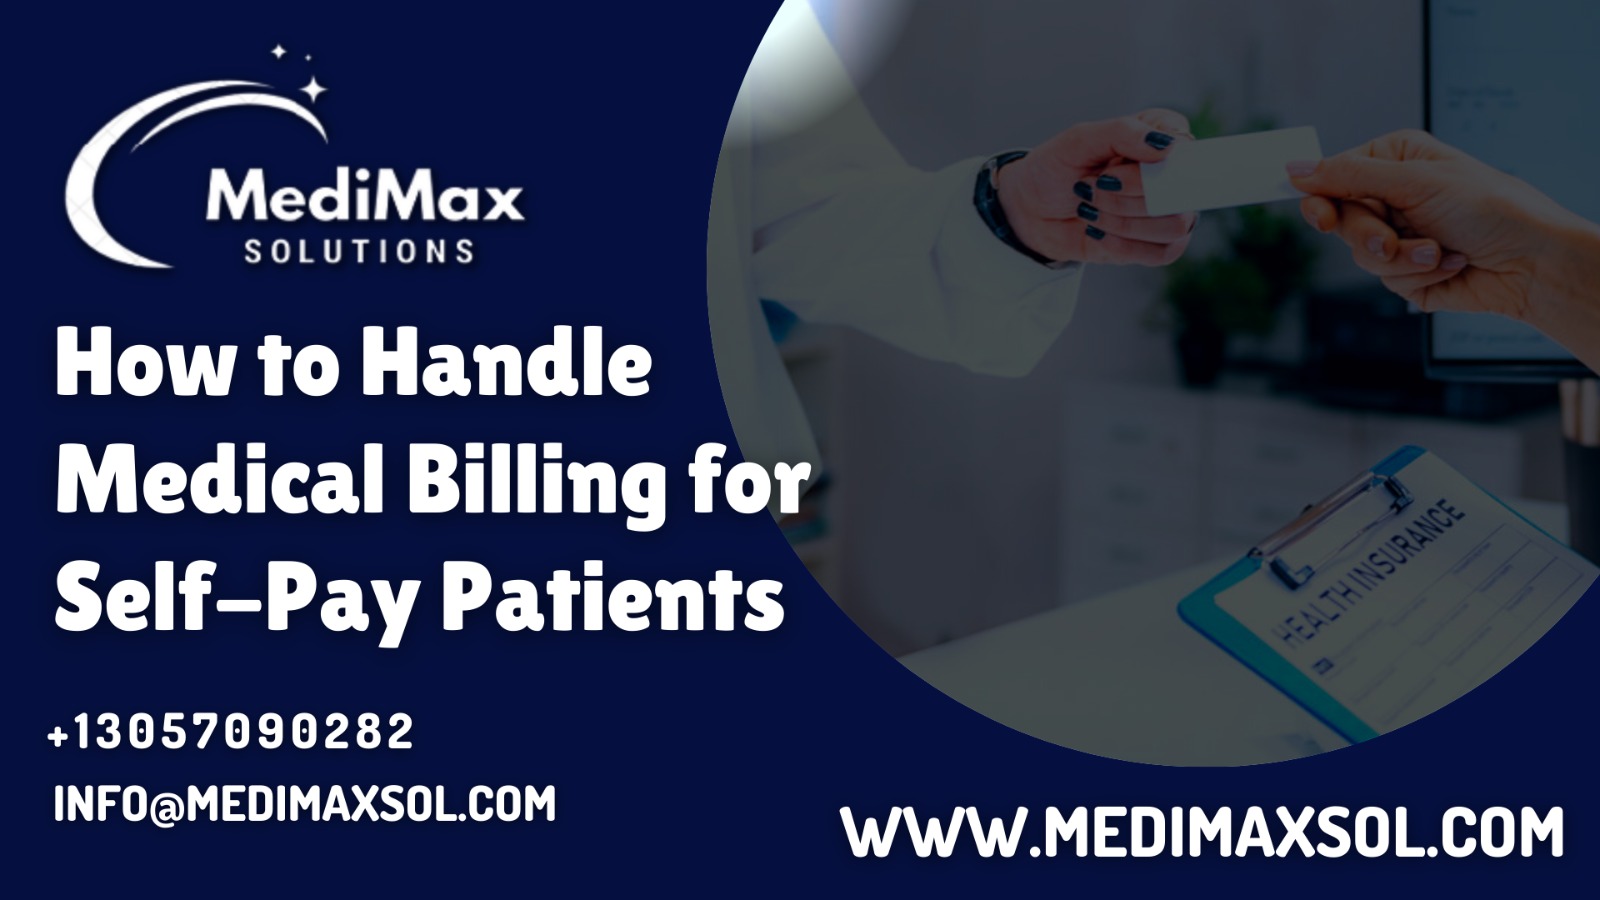 How to Handle Medical Billing for Self-Pay Patients